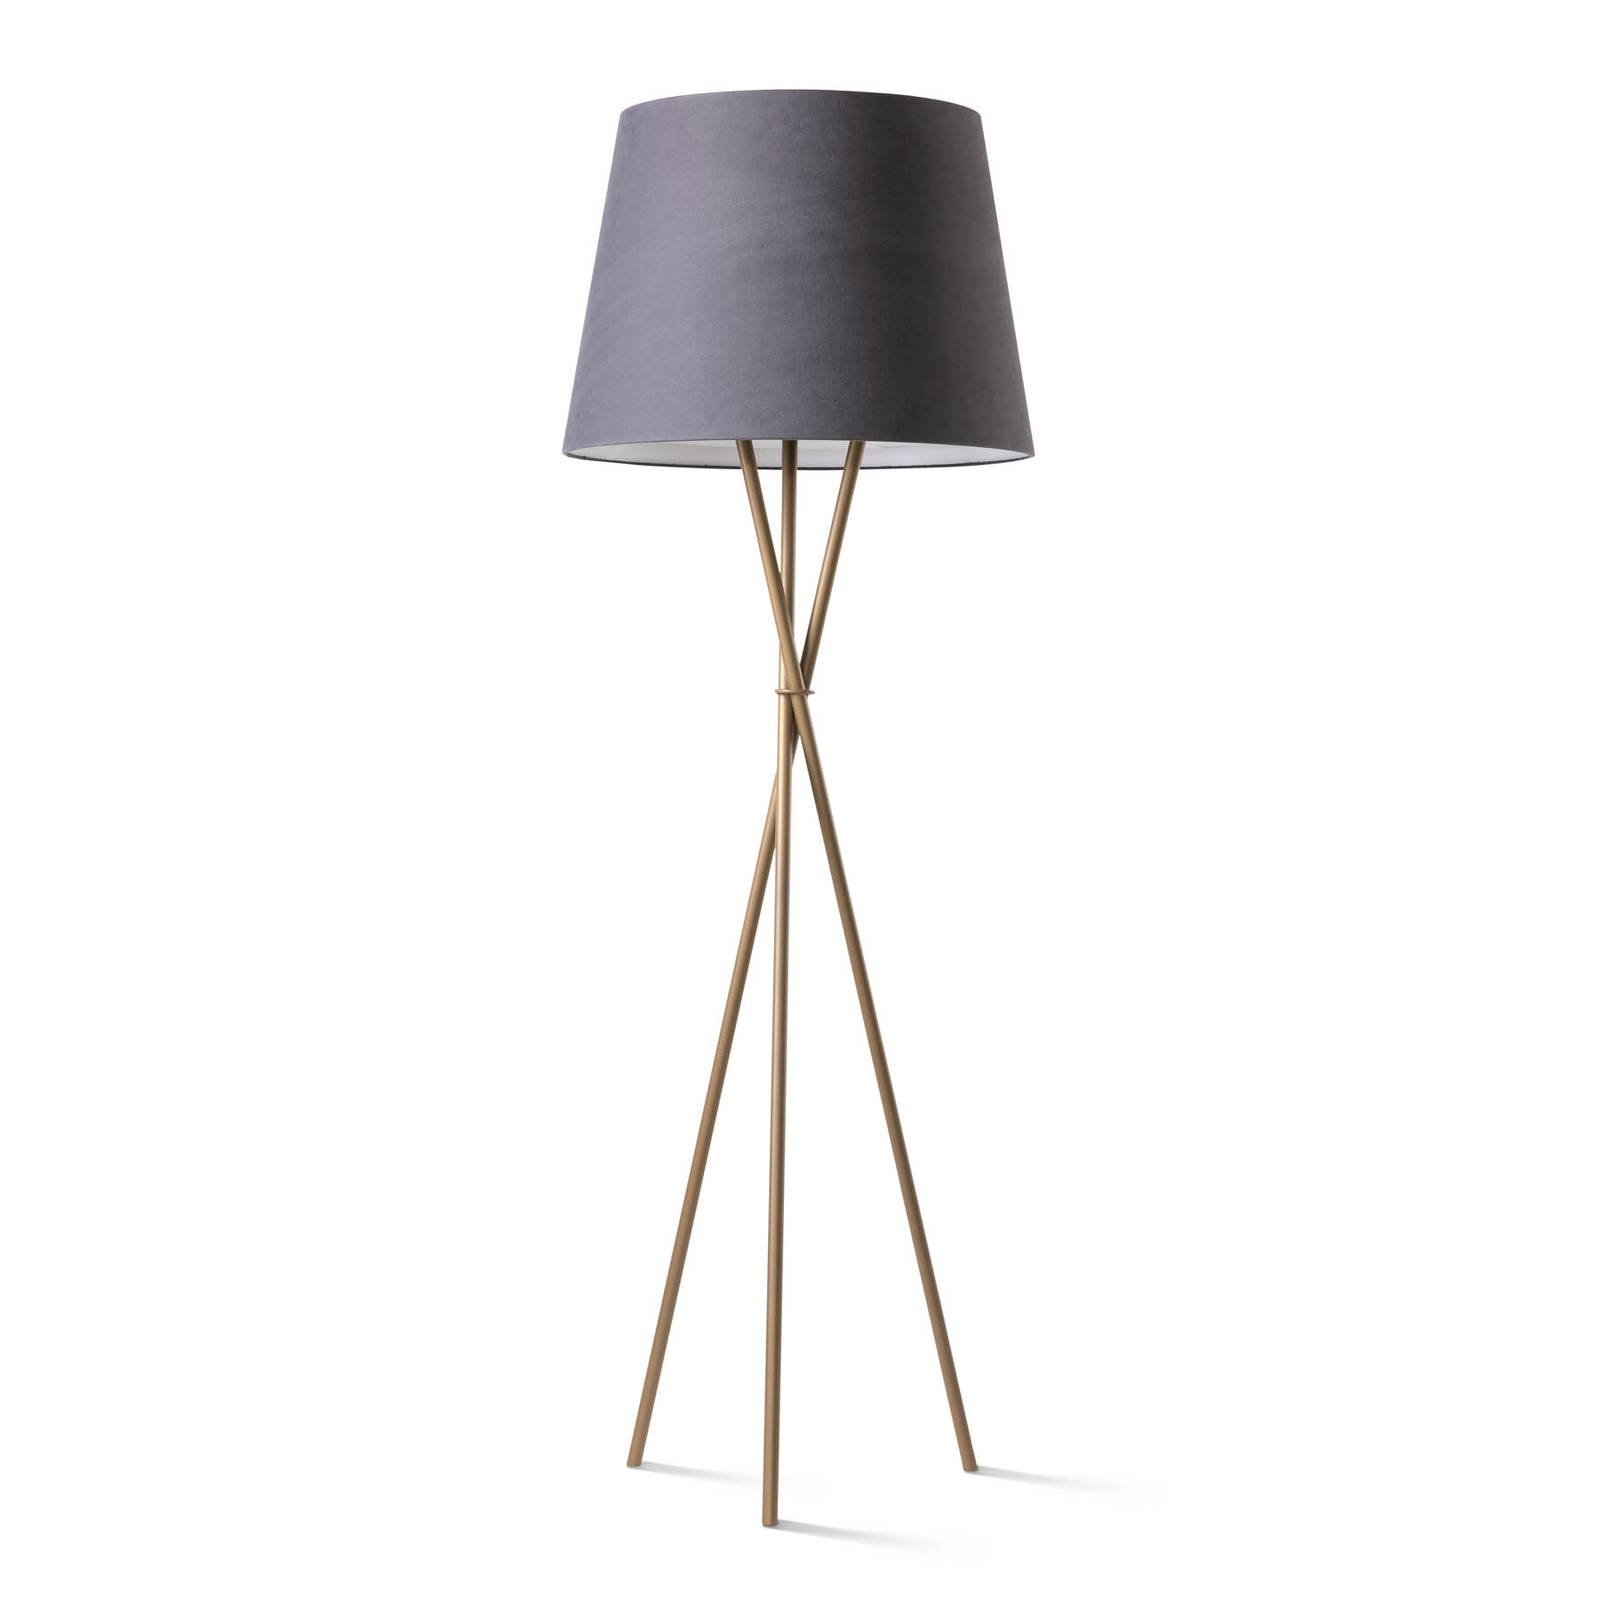 Image of Ozonos Hailey AC-1 lampadaire LED or/gris charbon 